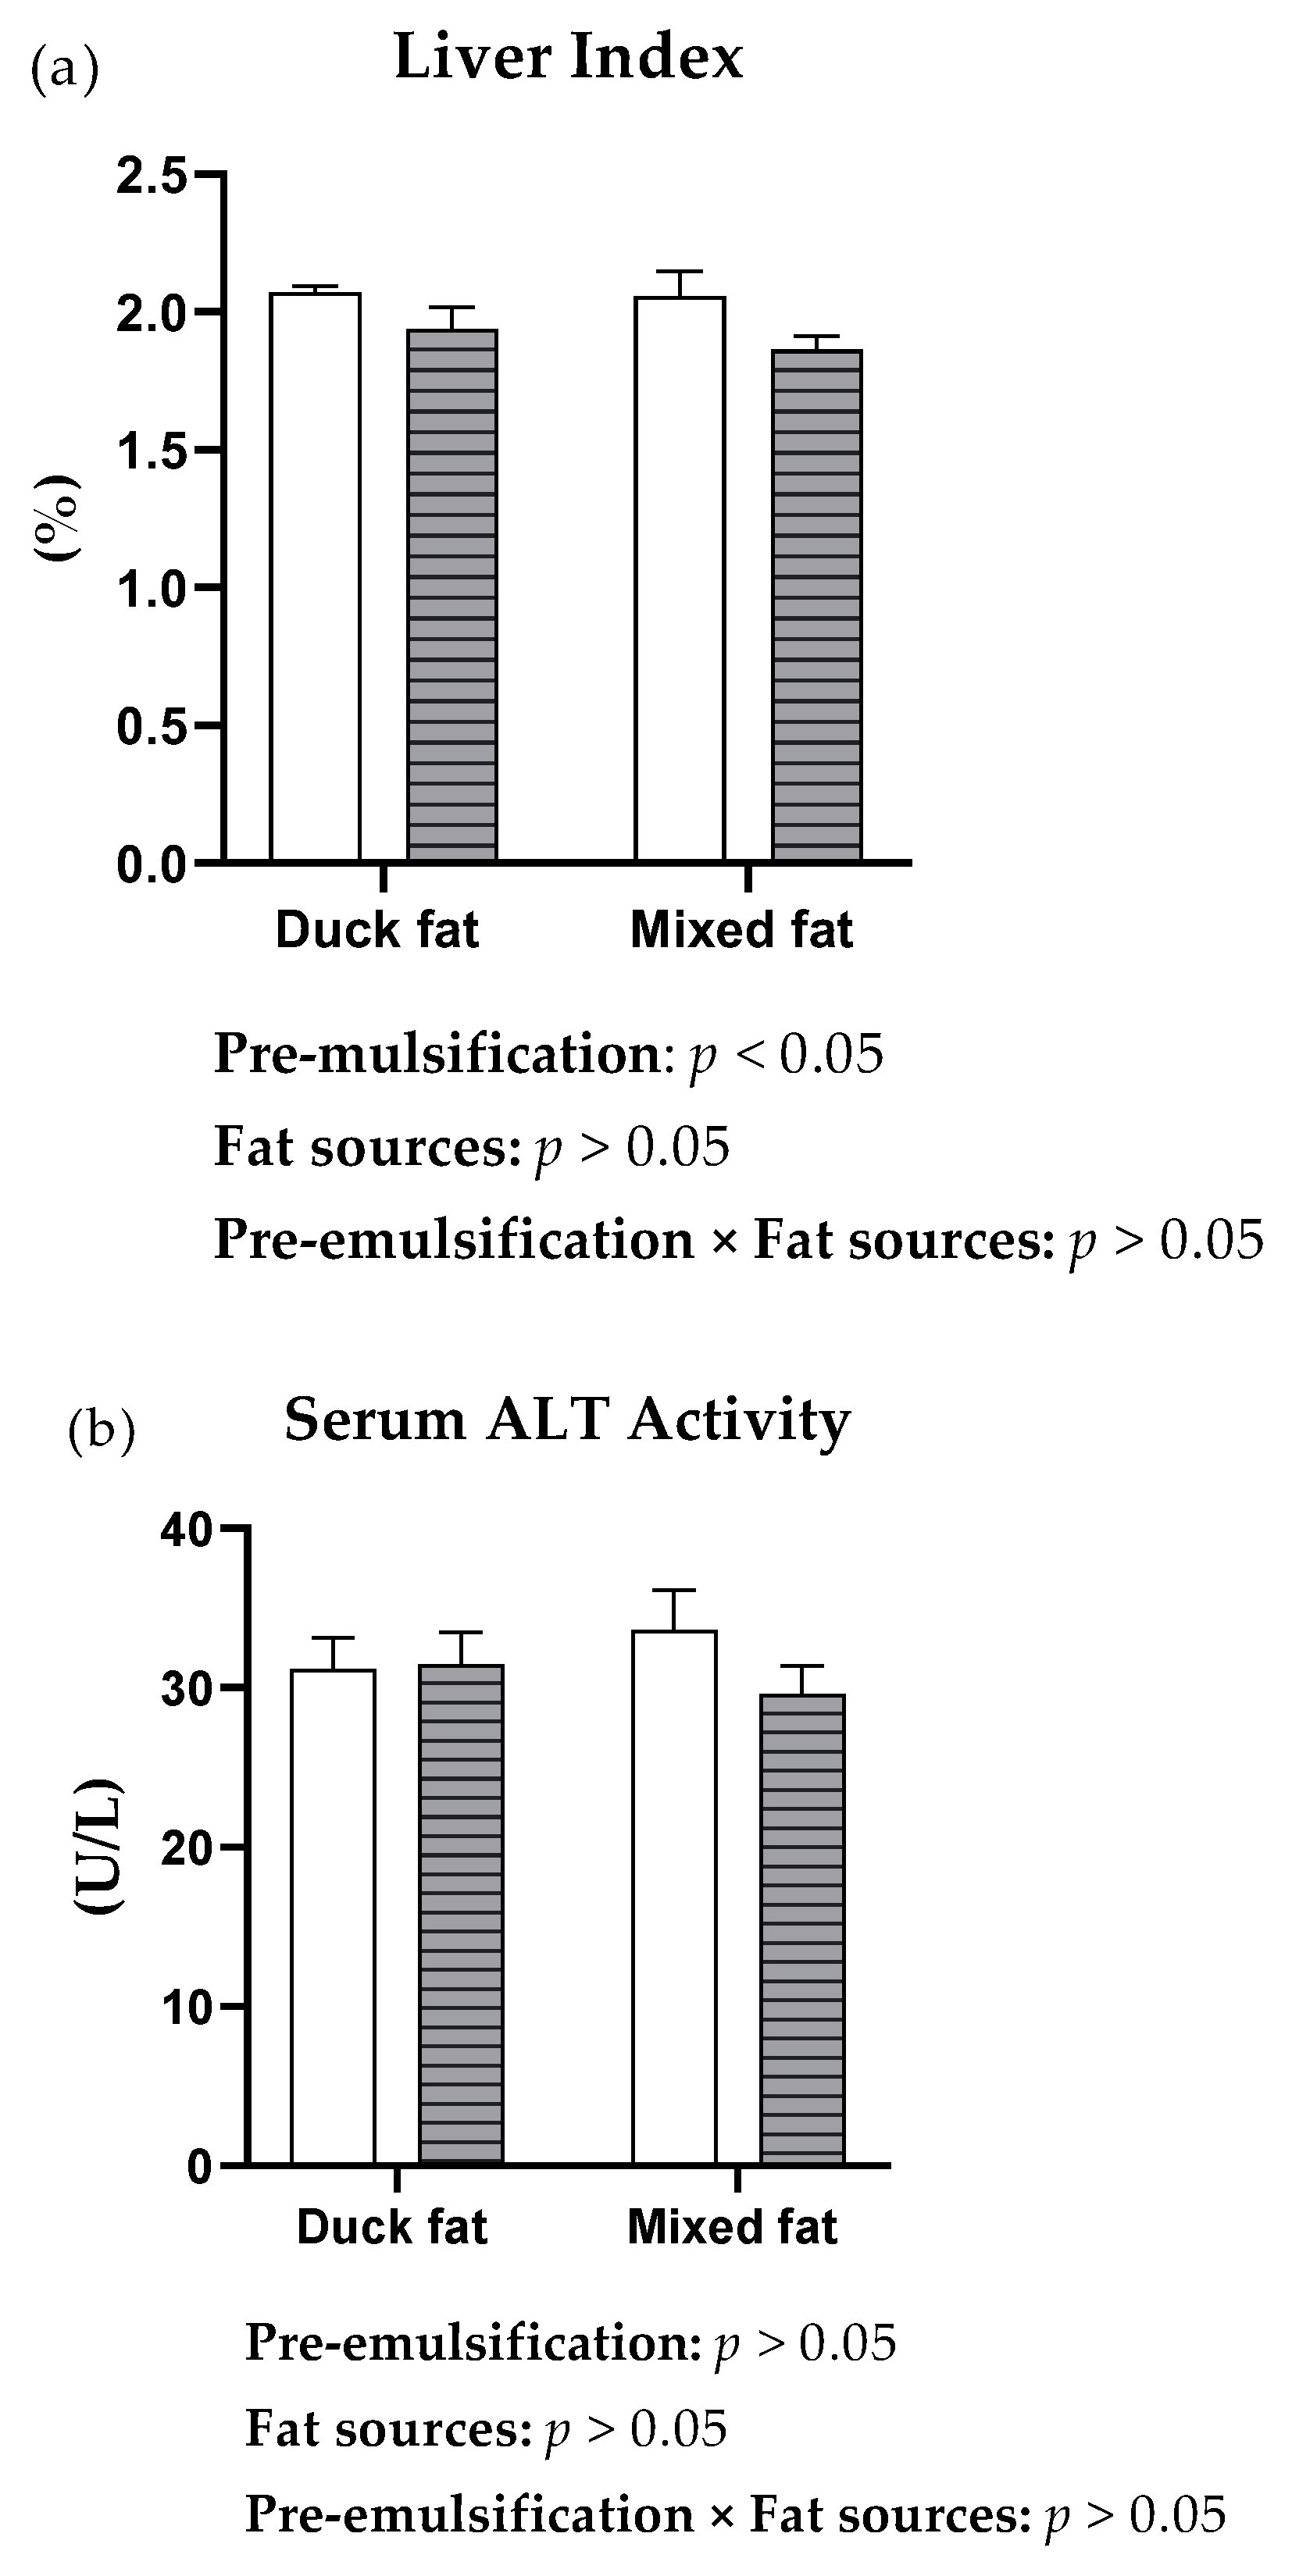 Animals | Free Full-Text | Effects of Fat Pre-Emulsification on 